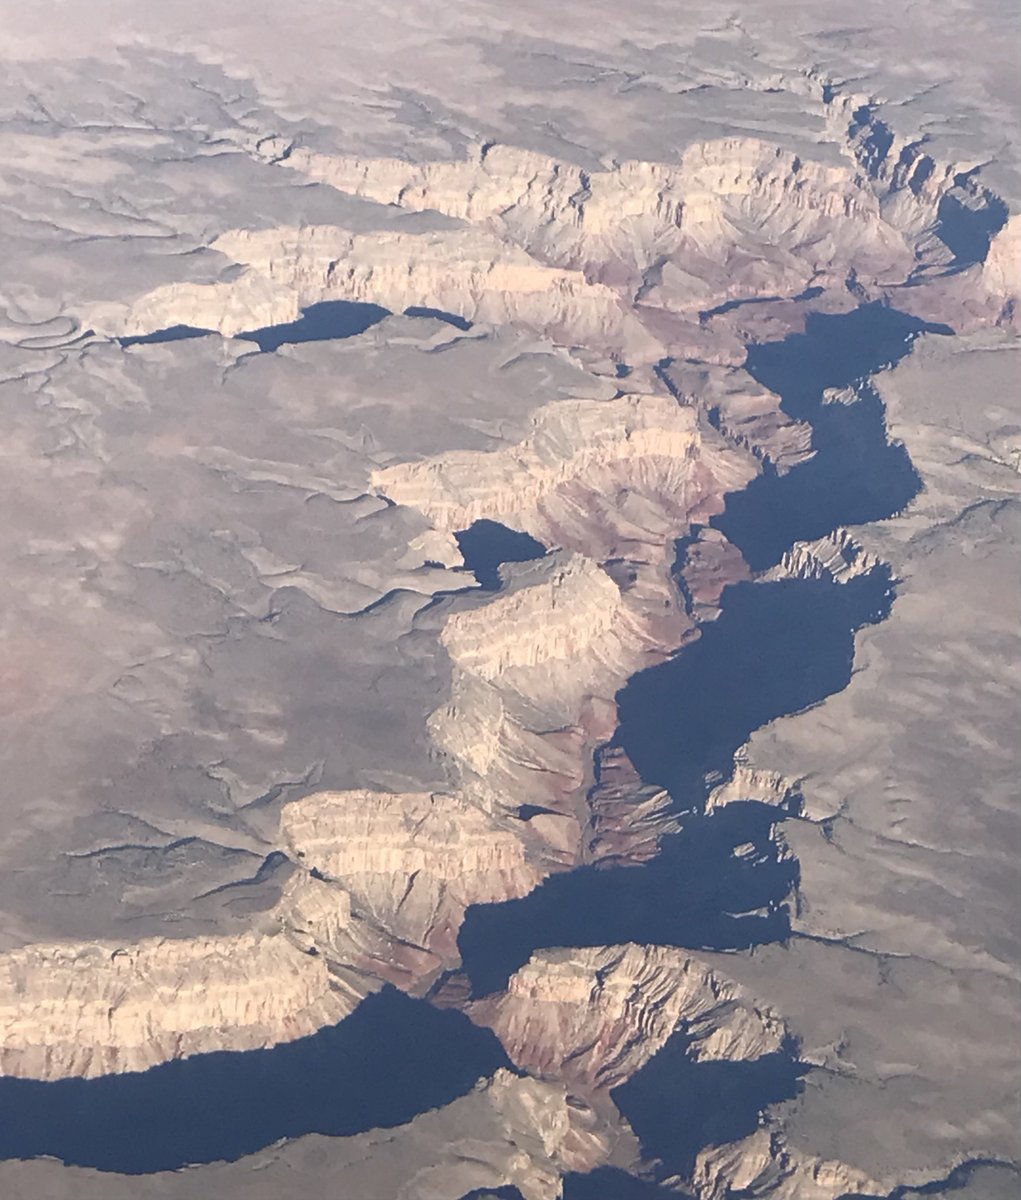 Nice view of the Grand Canyon 😎✈️#StormHour